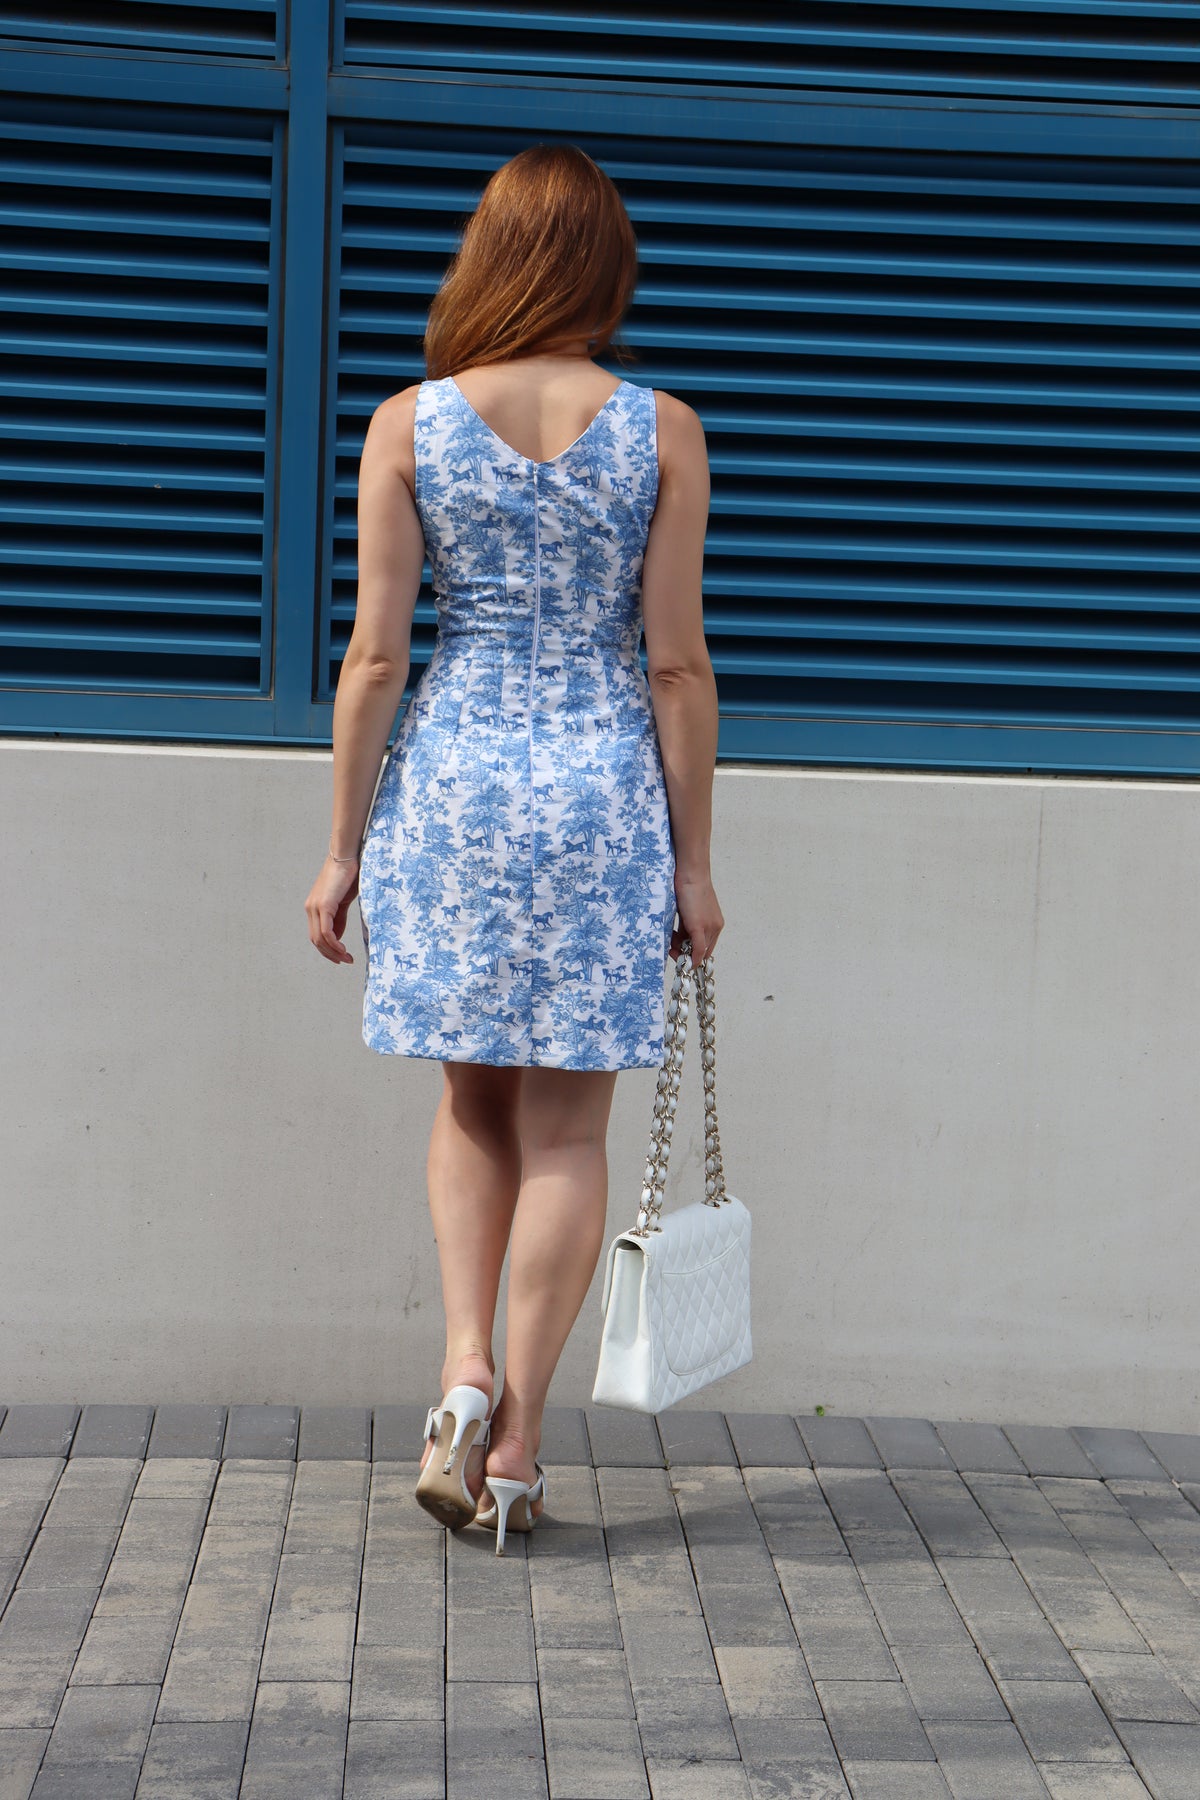 Back view of Short Blue Toile Sheath Dress printed with horses